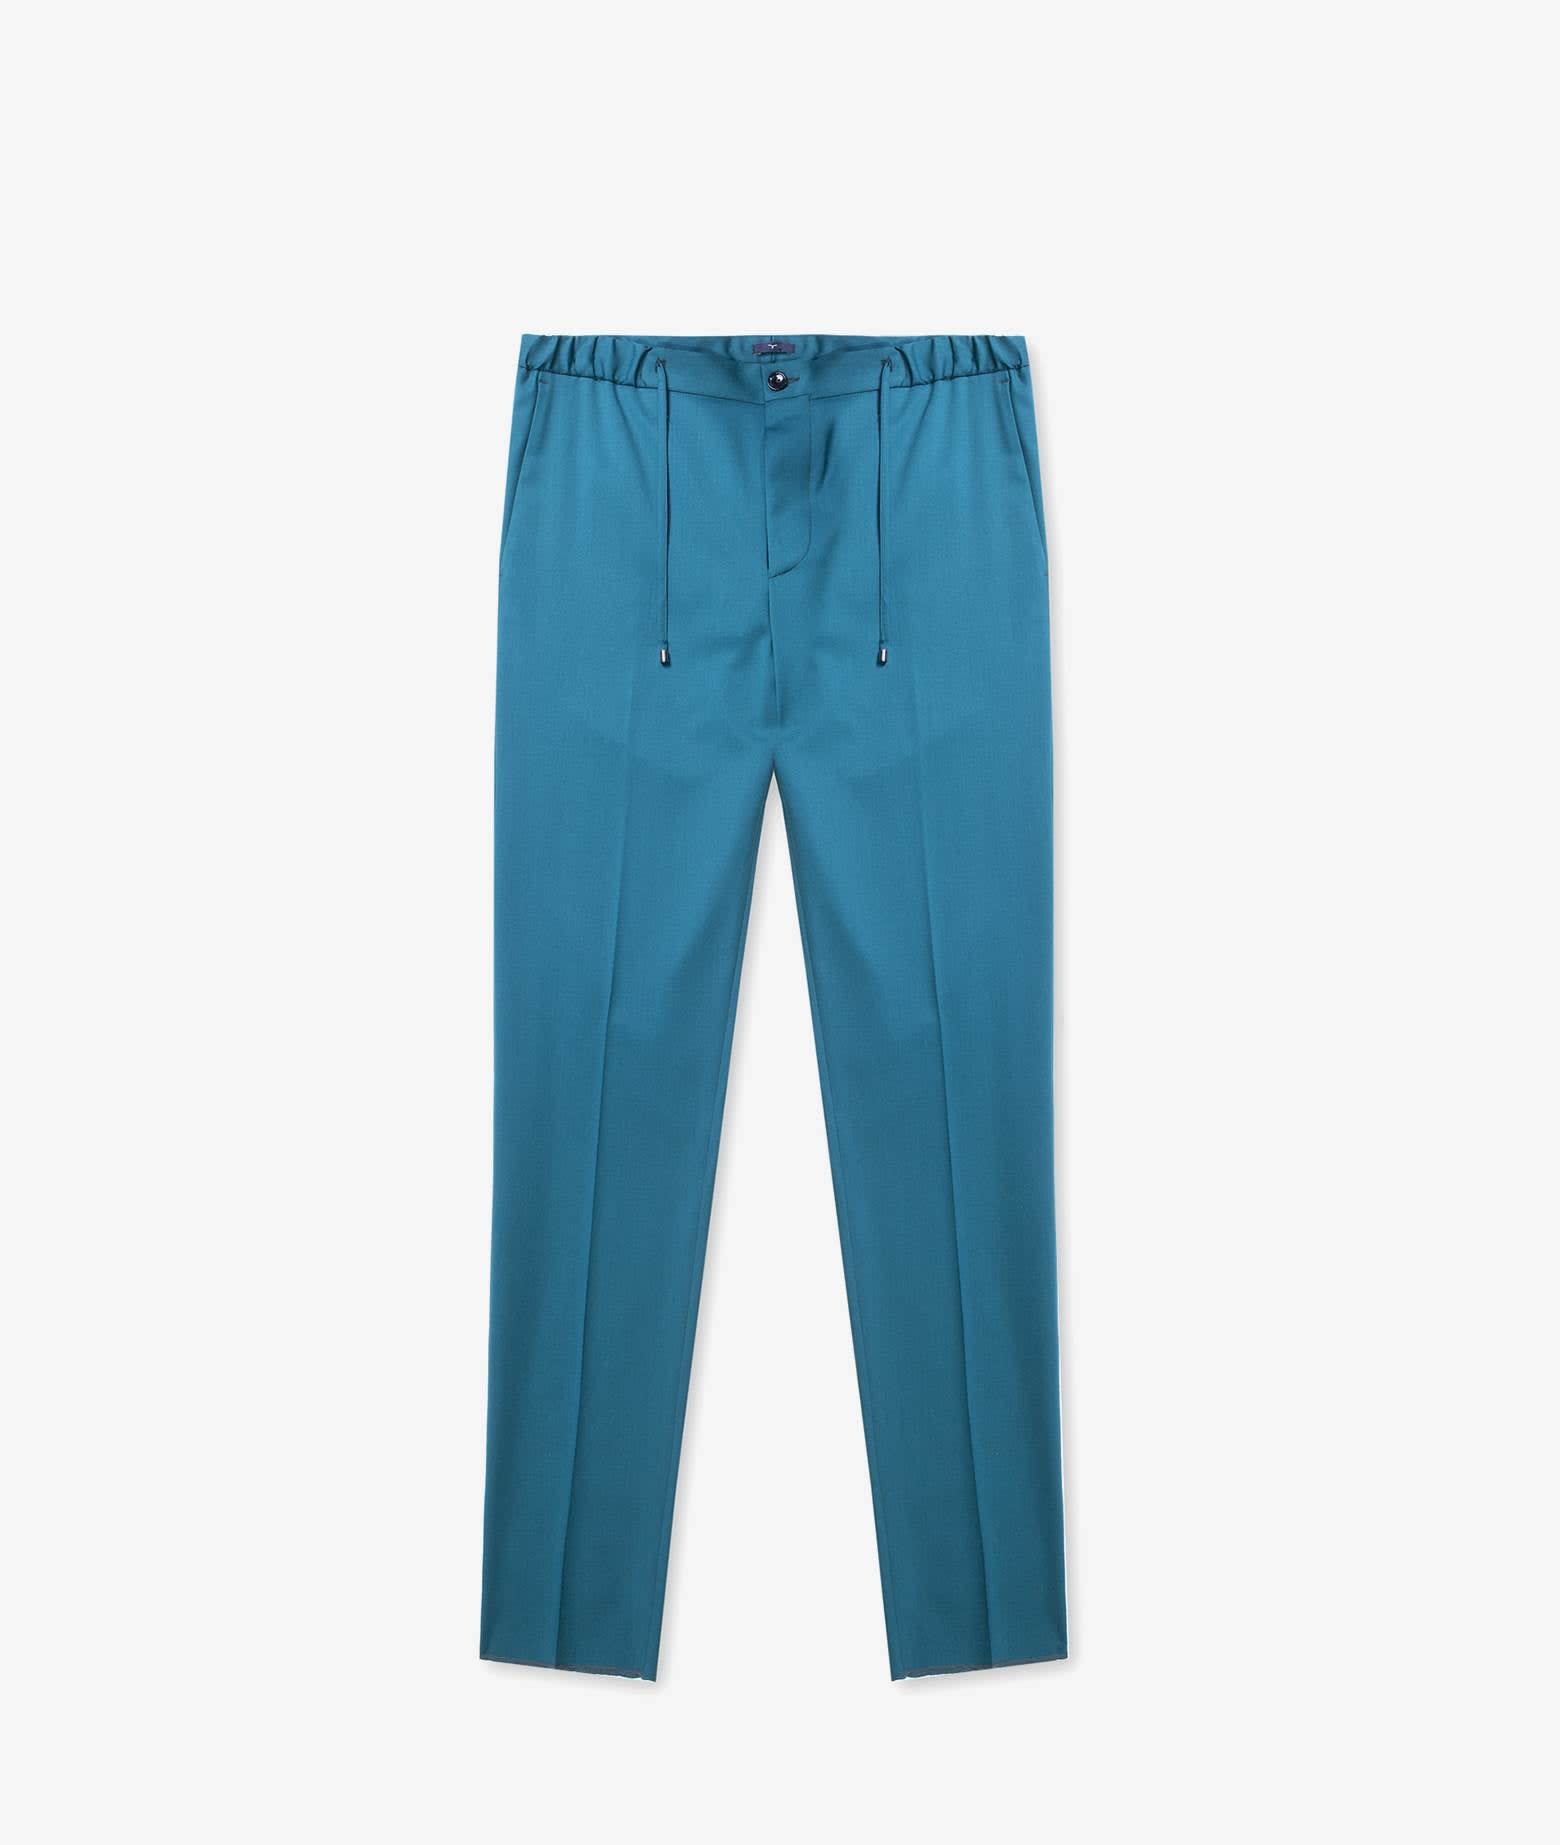 Larusmiani Trousers D20 Pants In Teal